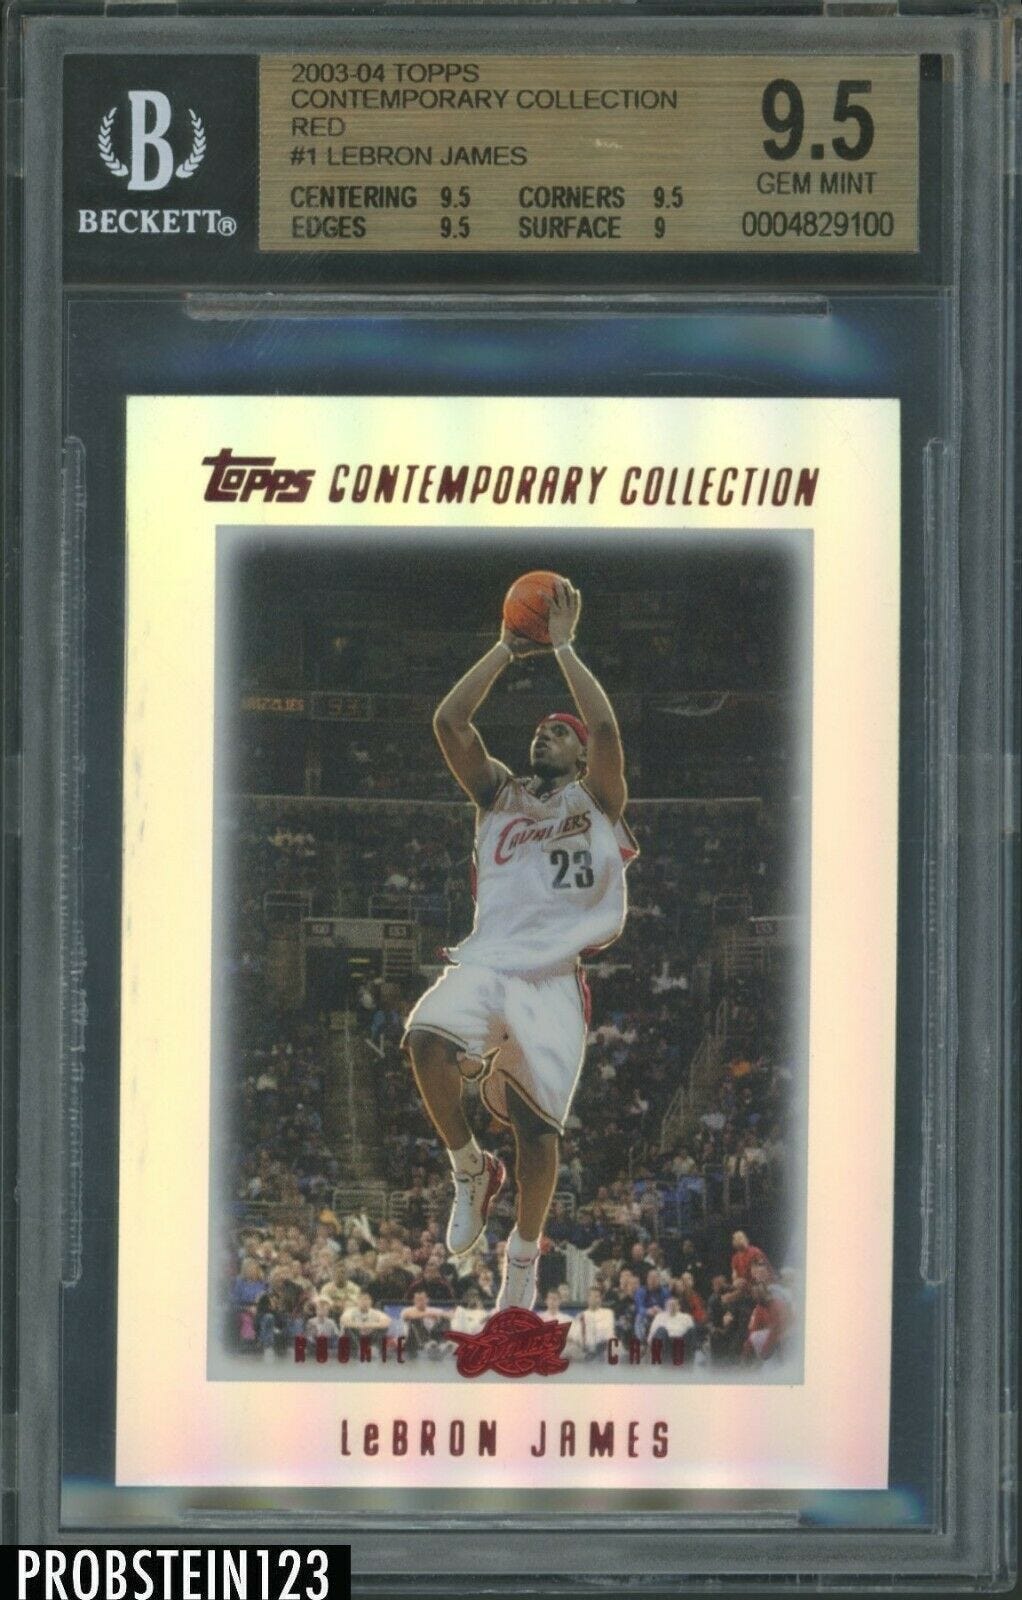 Image 1 - 2003-04 Topps Contemporary Collection Red #1 LeBron James RC Rookie /225 BGS 9.5